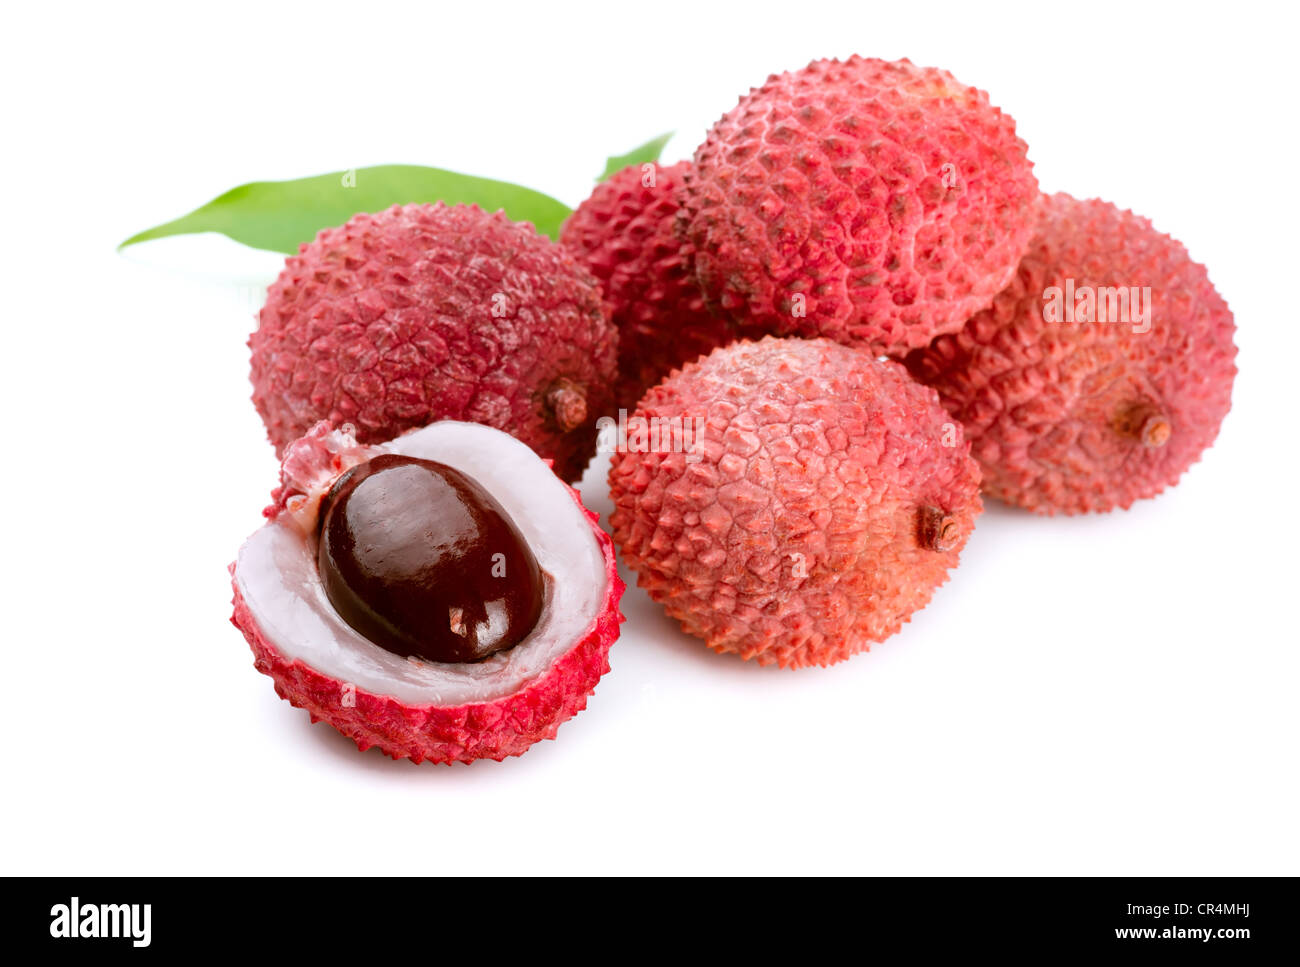 Litchis frais (Litchi chinensis) isolated on white Banque D'Images